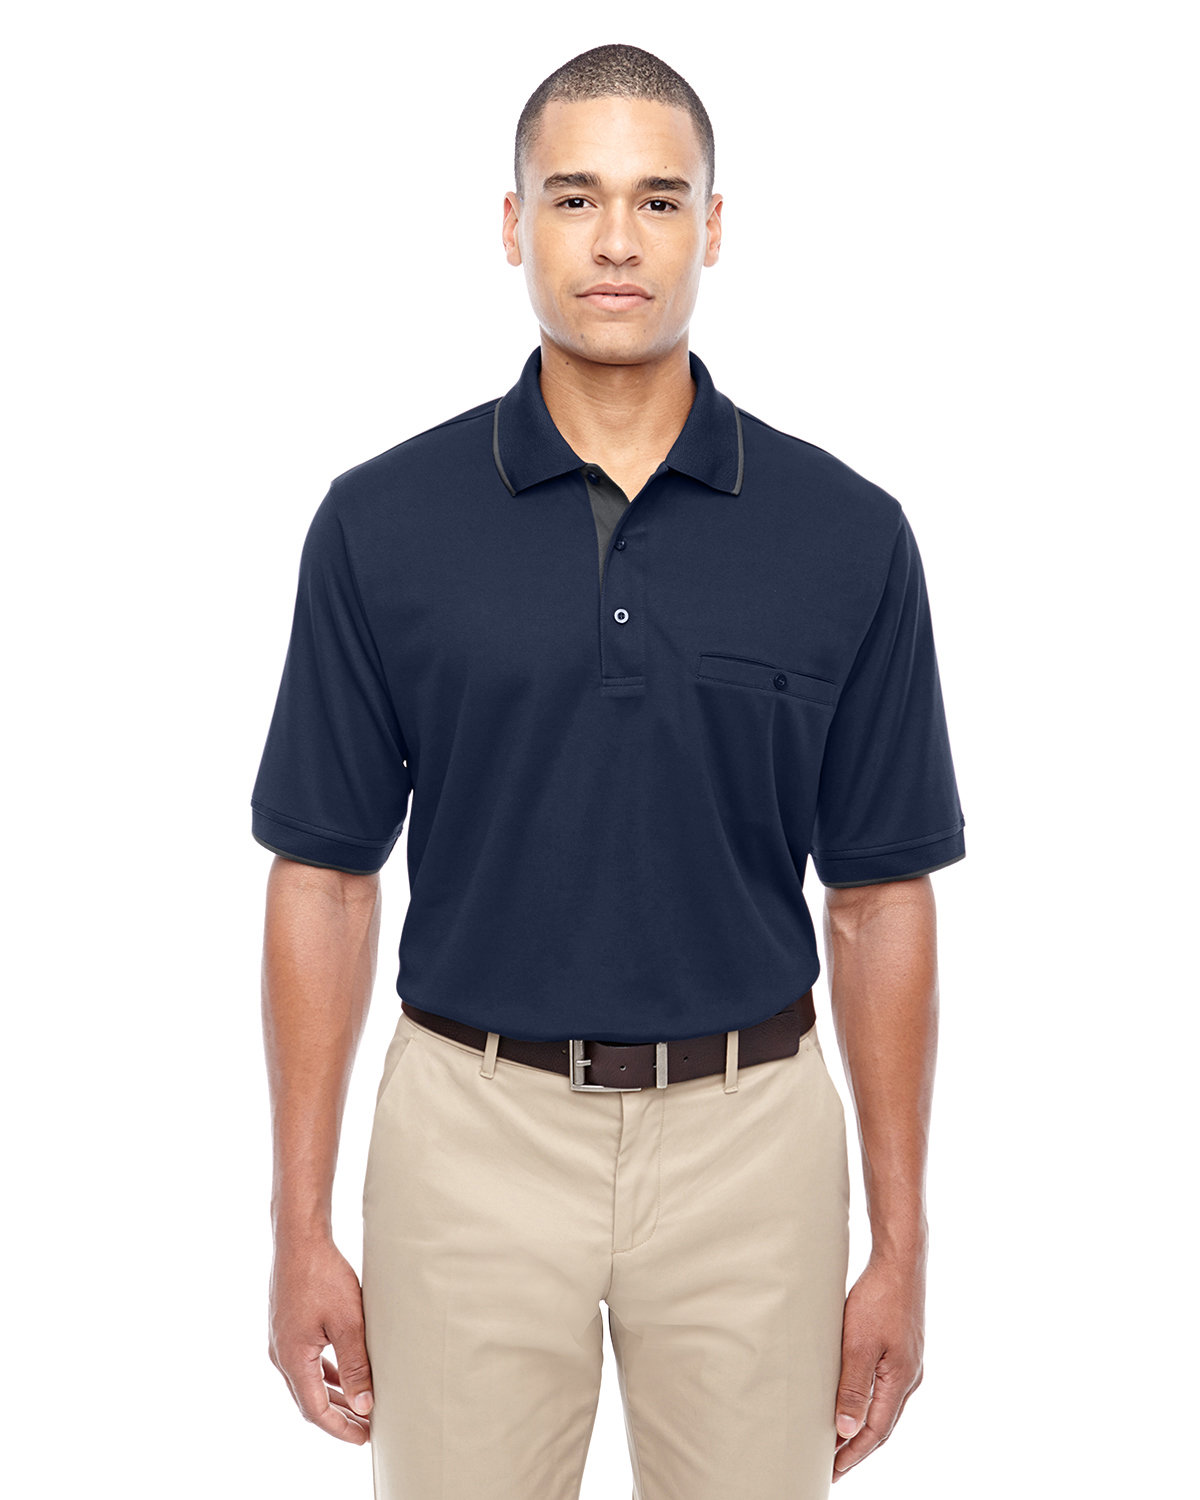 Core 365 Men's Motive Performance Piqué Polo with Tipped Collar CLASSC NVY/ CRBN 